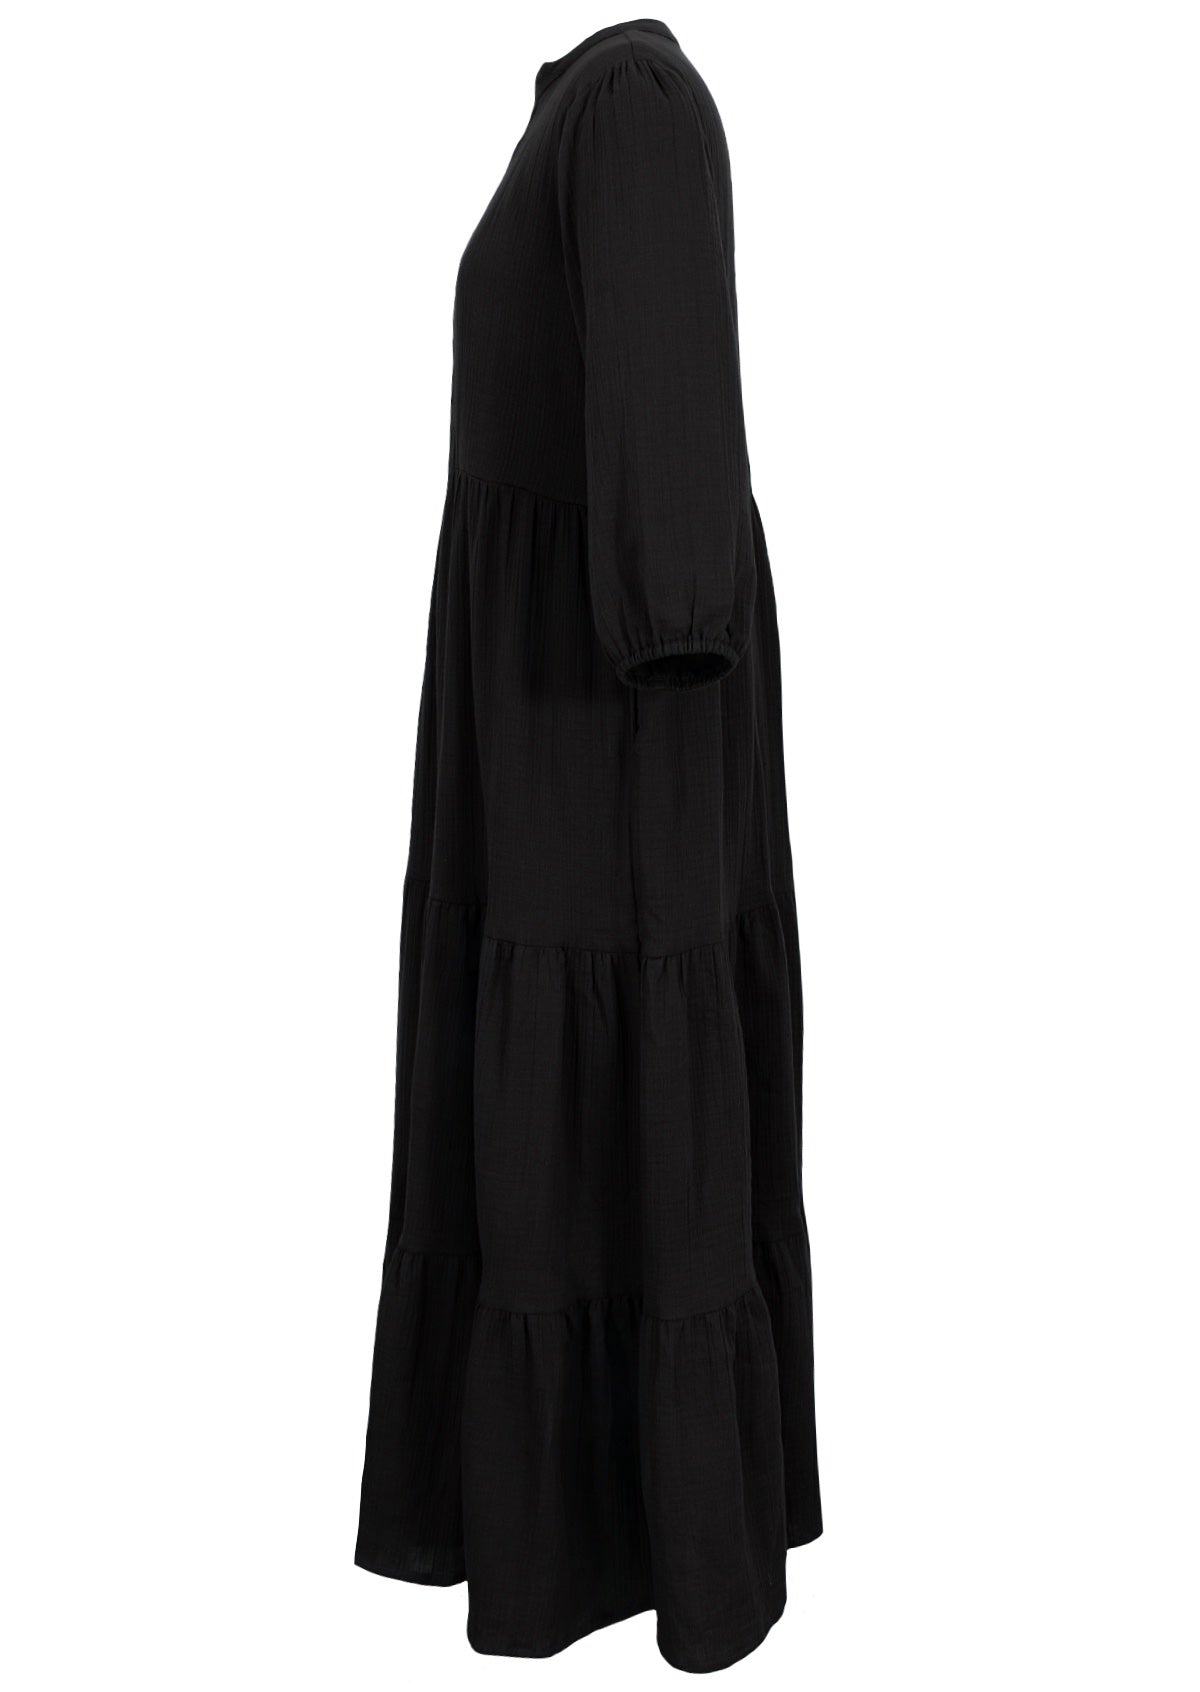 Black 100% cotton double layer of gauze boho tiered maxi dress with hidden side pockets